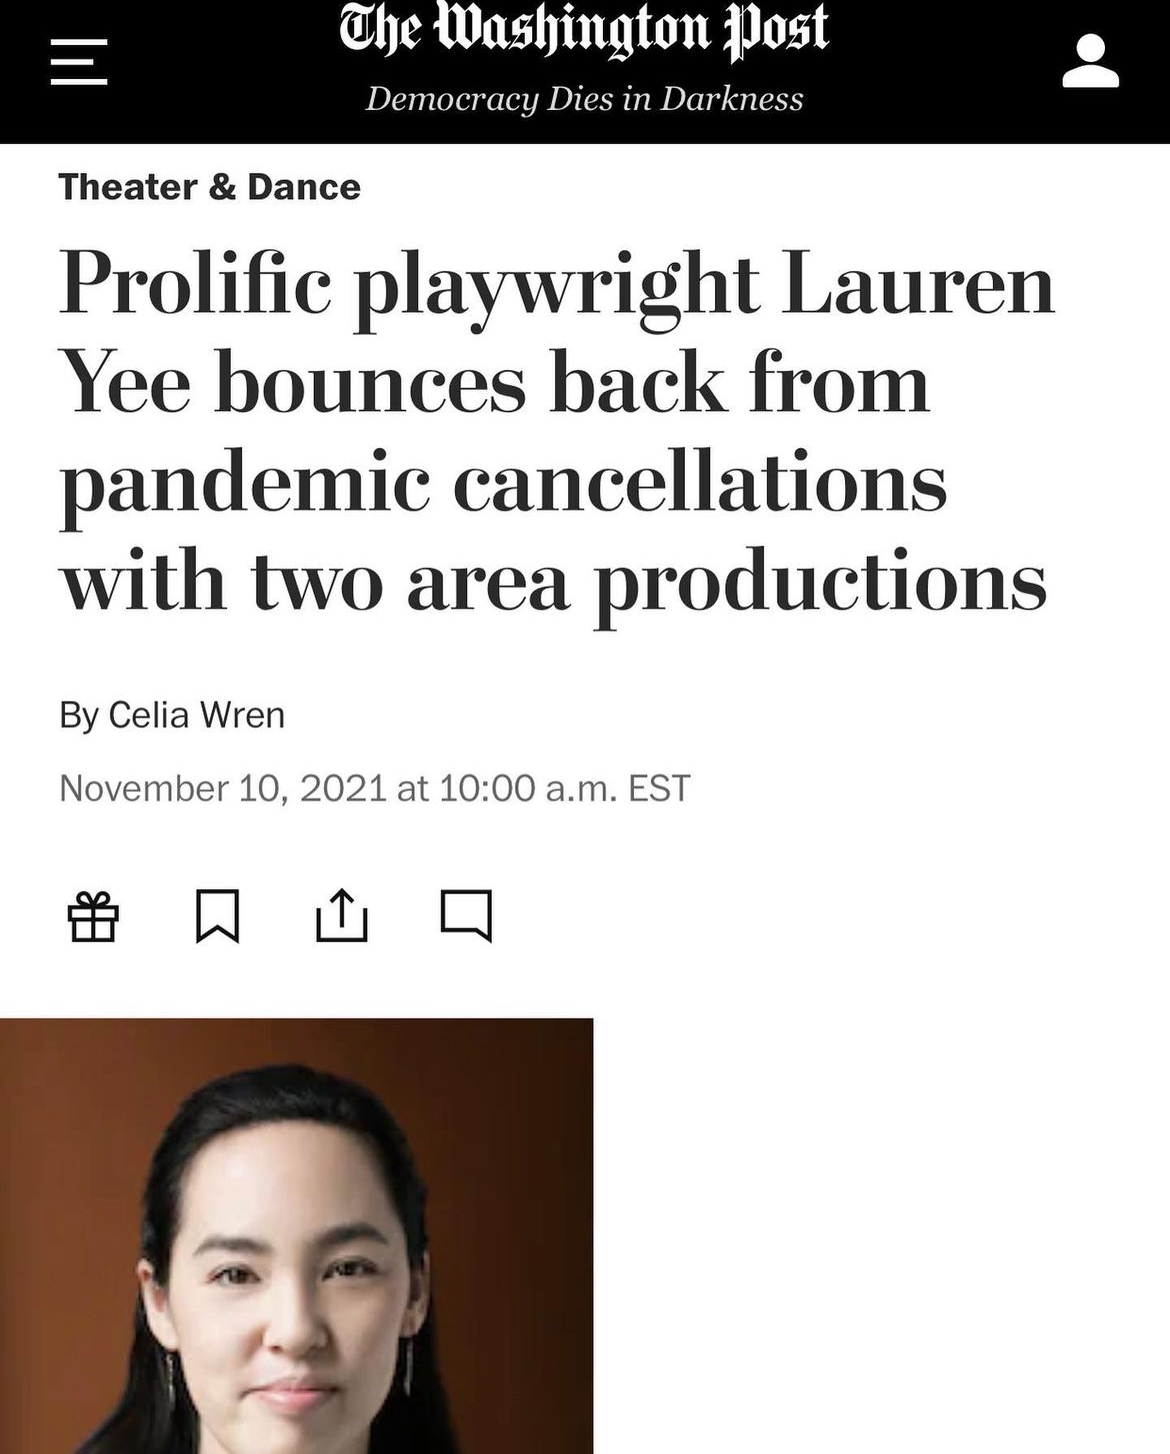 Washington Post Feature: Prolific playwright Lauren Yee bounces back from pandemic cancellations with two area productions